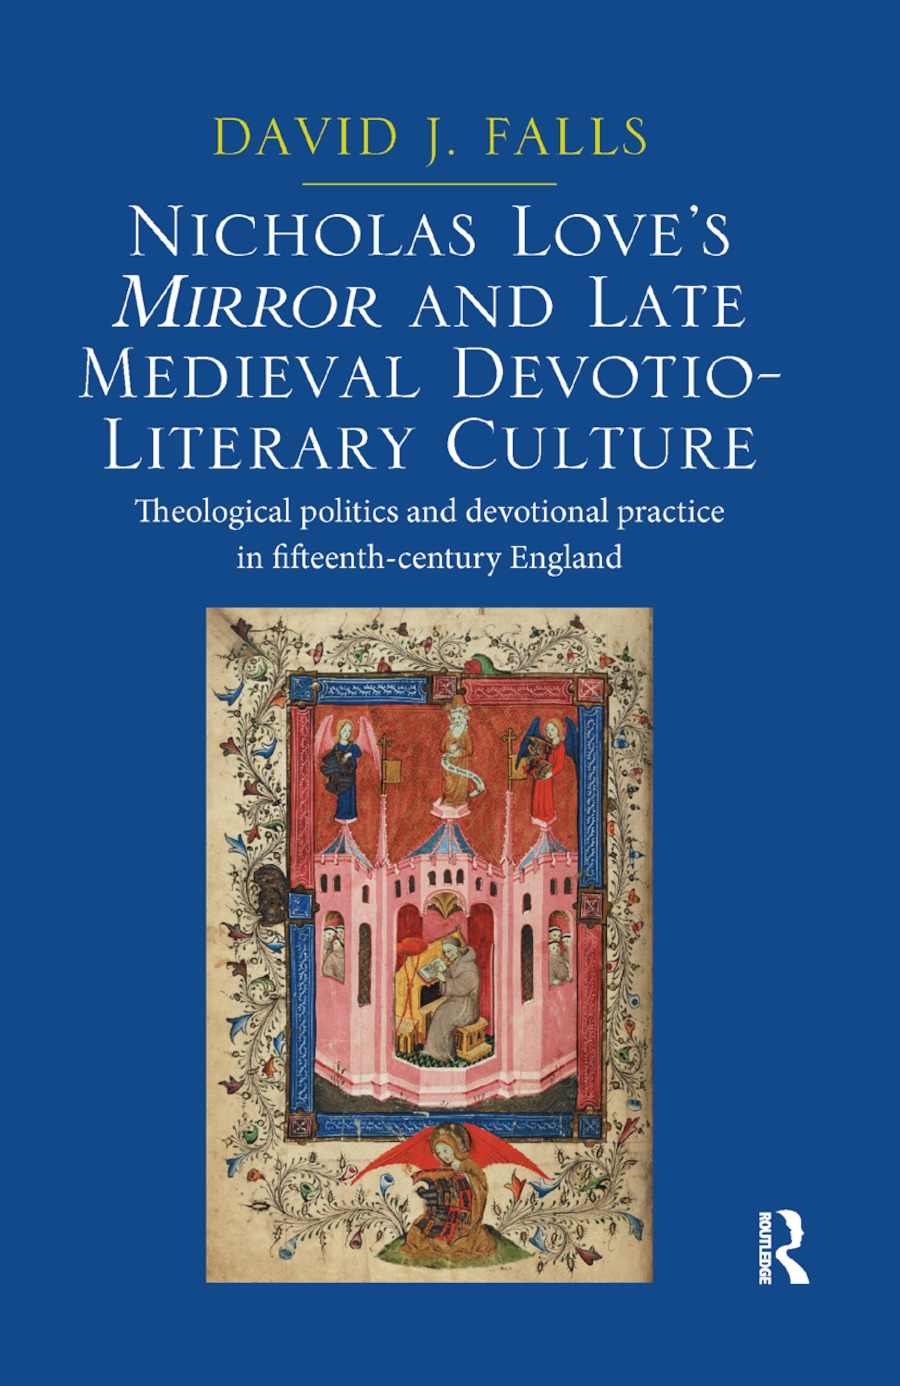 Nicholas Love’’s Mirror and Late Medieval Devotio-Literary Culture: Theological Politics and Devotional Practice in Fifteenth-Century England